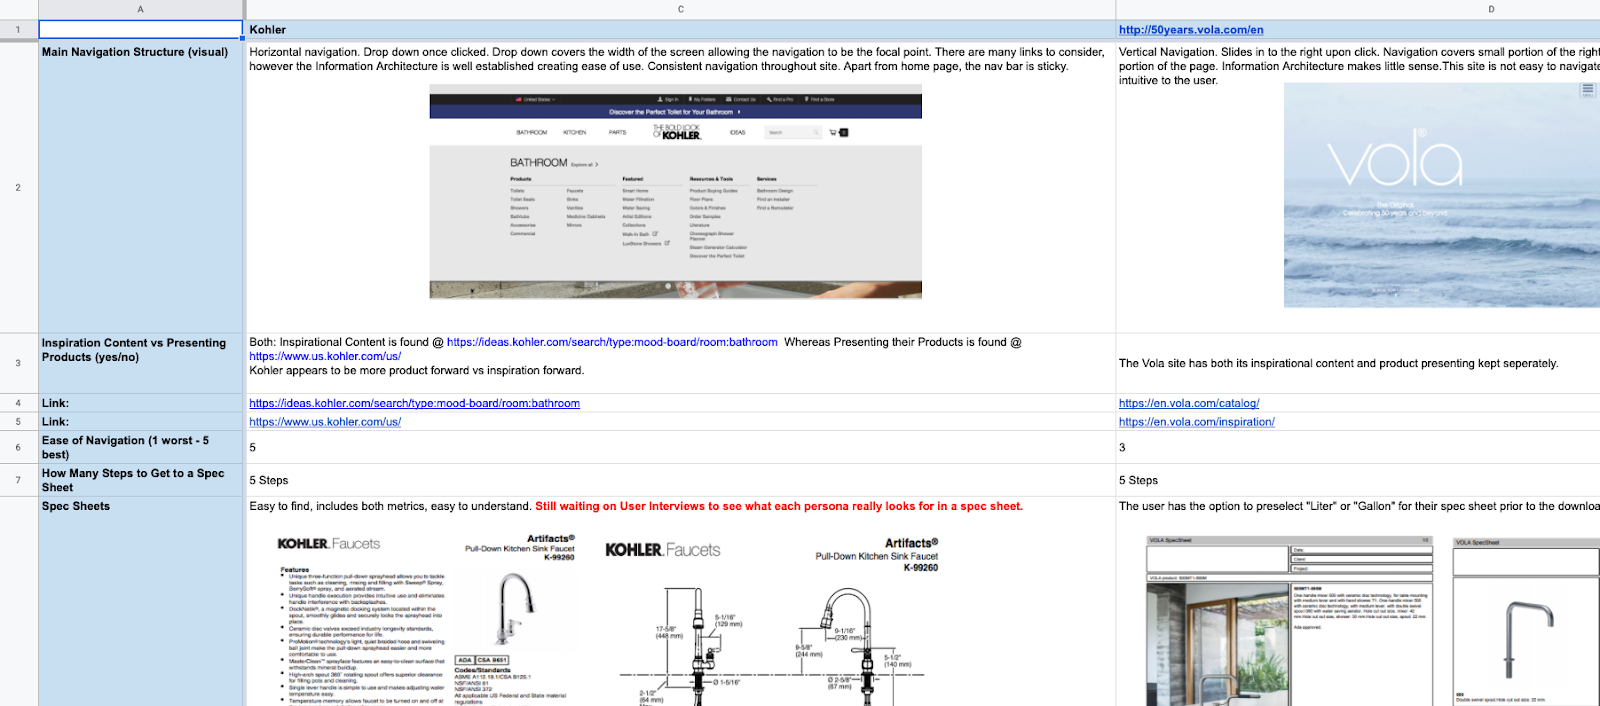 A competitive analysis for a kitchen and bathroom fixture website is documented in Google Sheets with visual, quantitative, and qualitative comparison metrics.